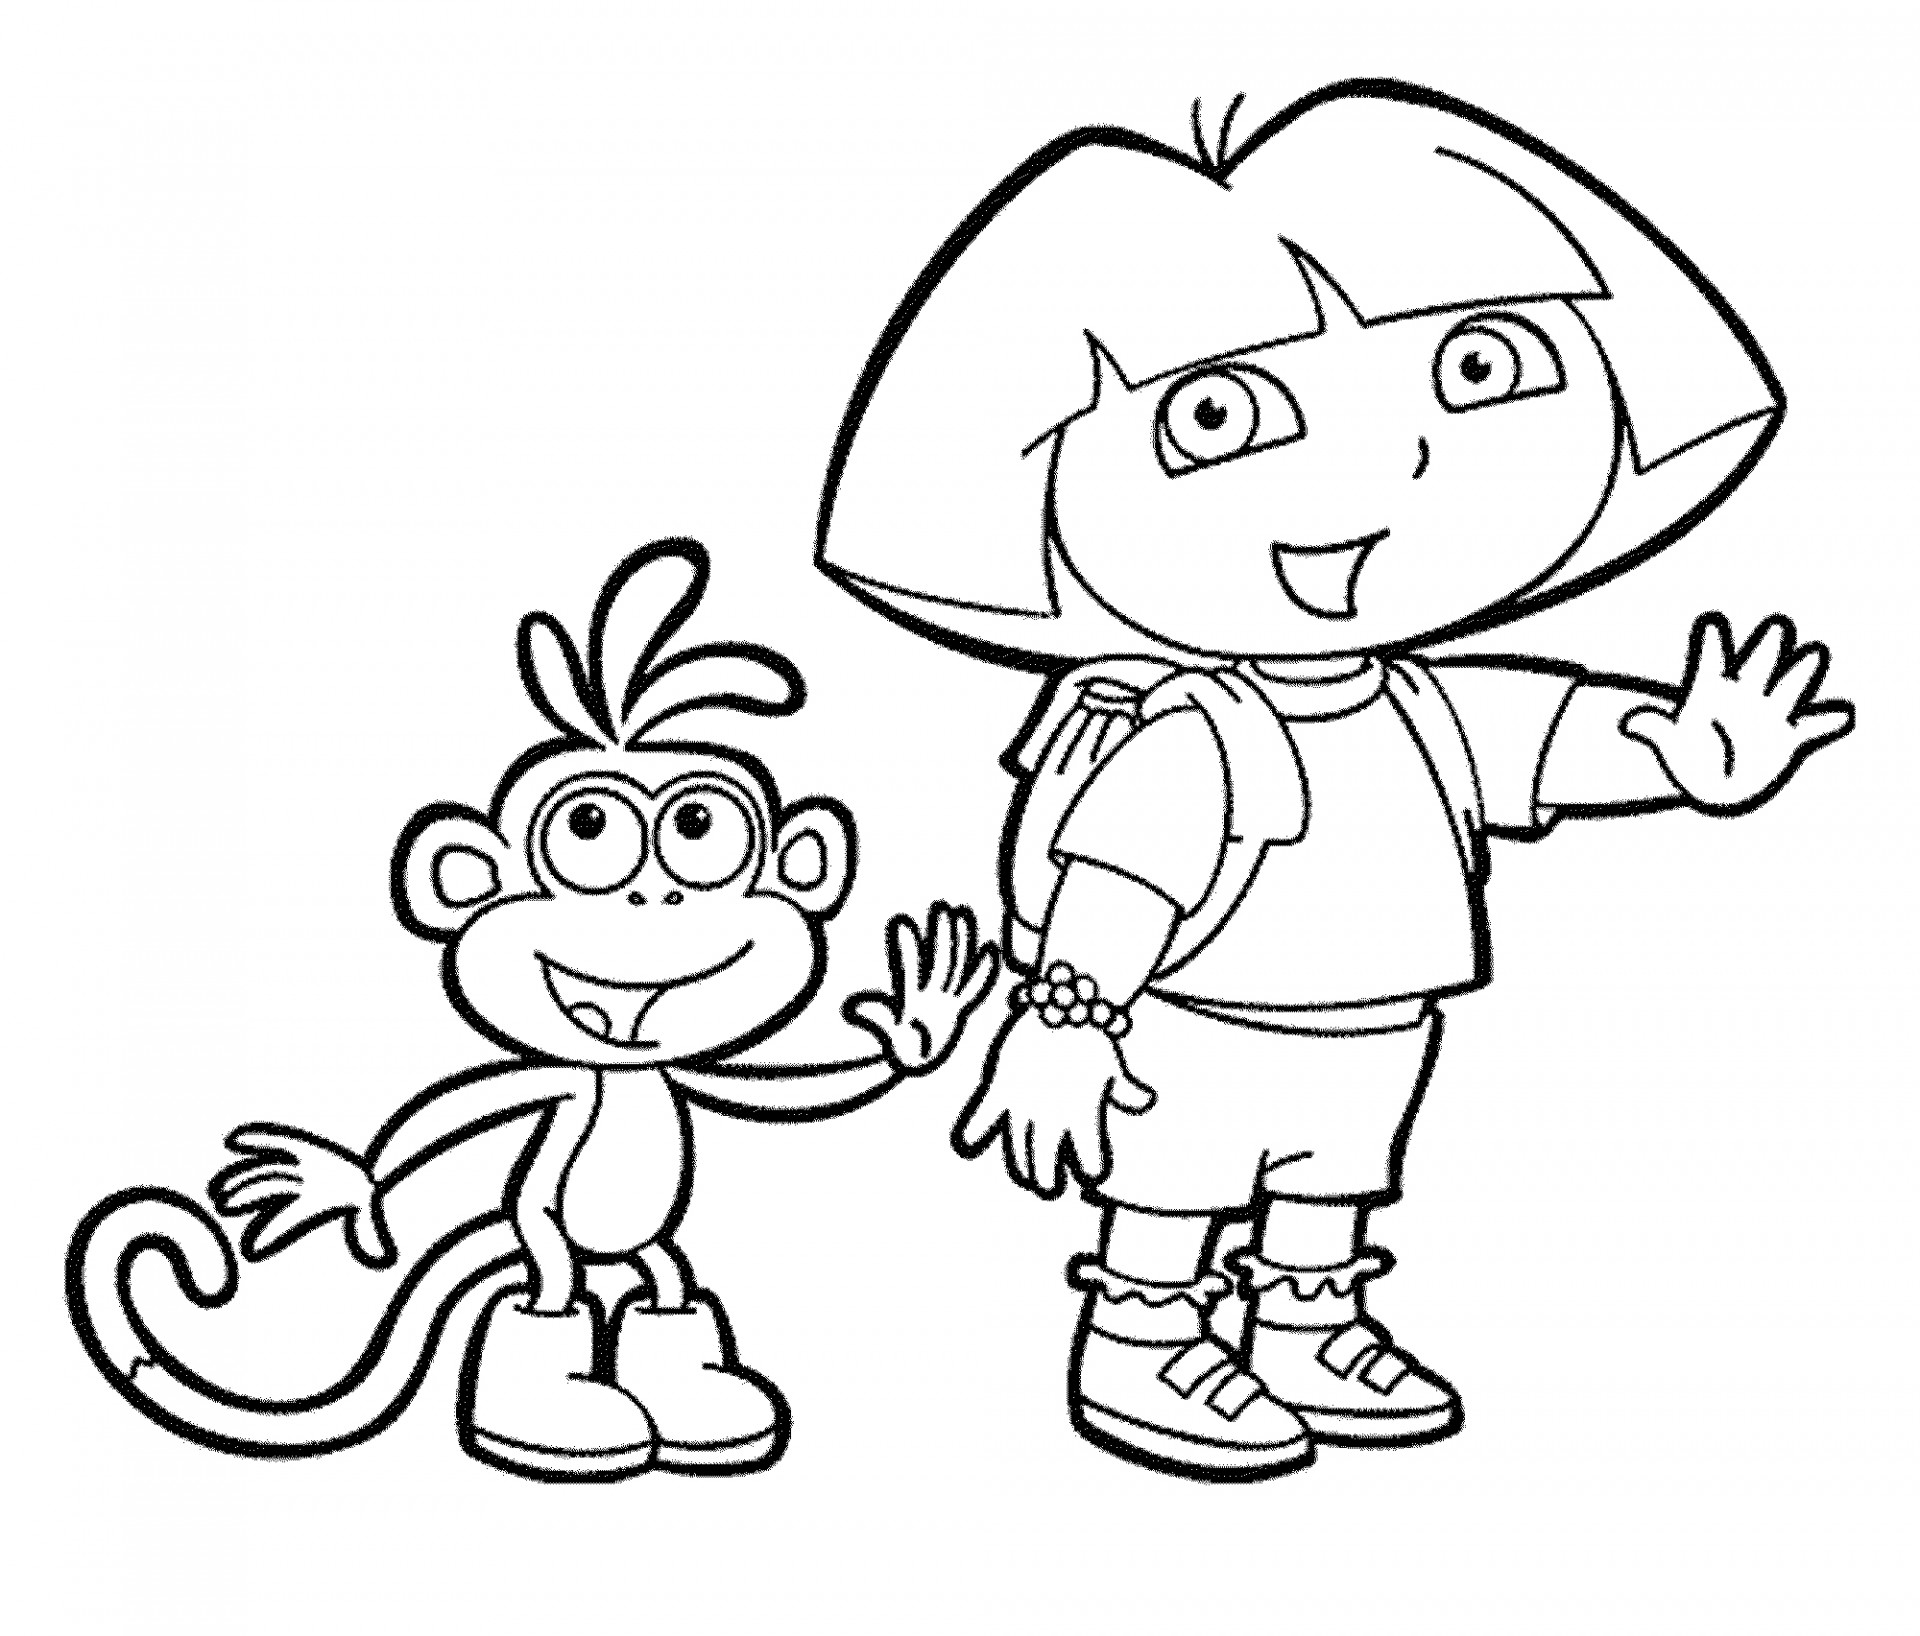 Dora The Explorer Sketch at PaintingValley.com | Explore collection of ...